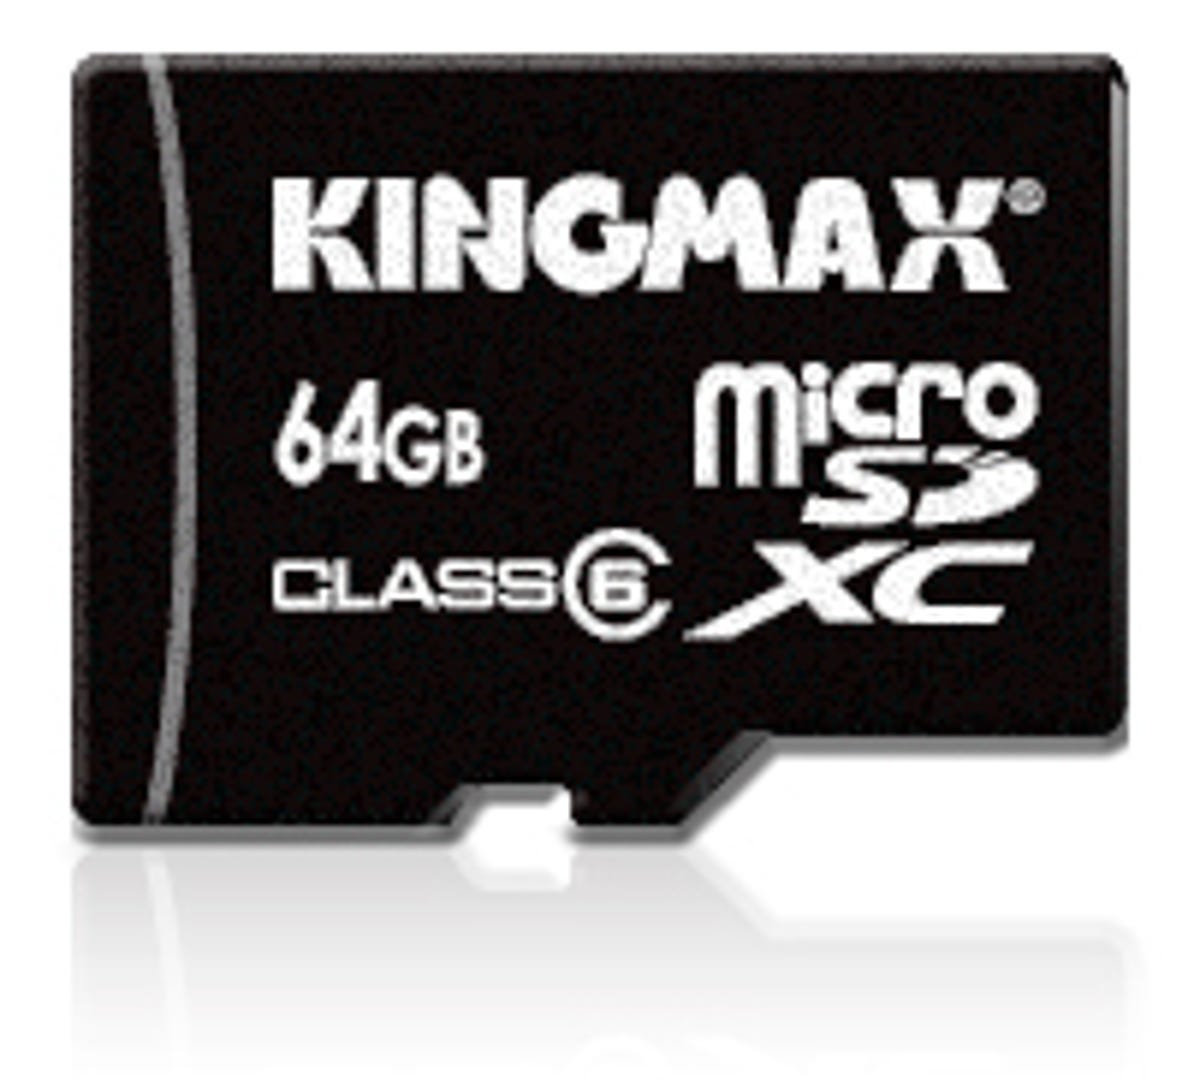 A blown up picture of Kingmax's first 64GB microSD card.